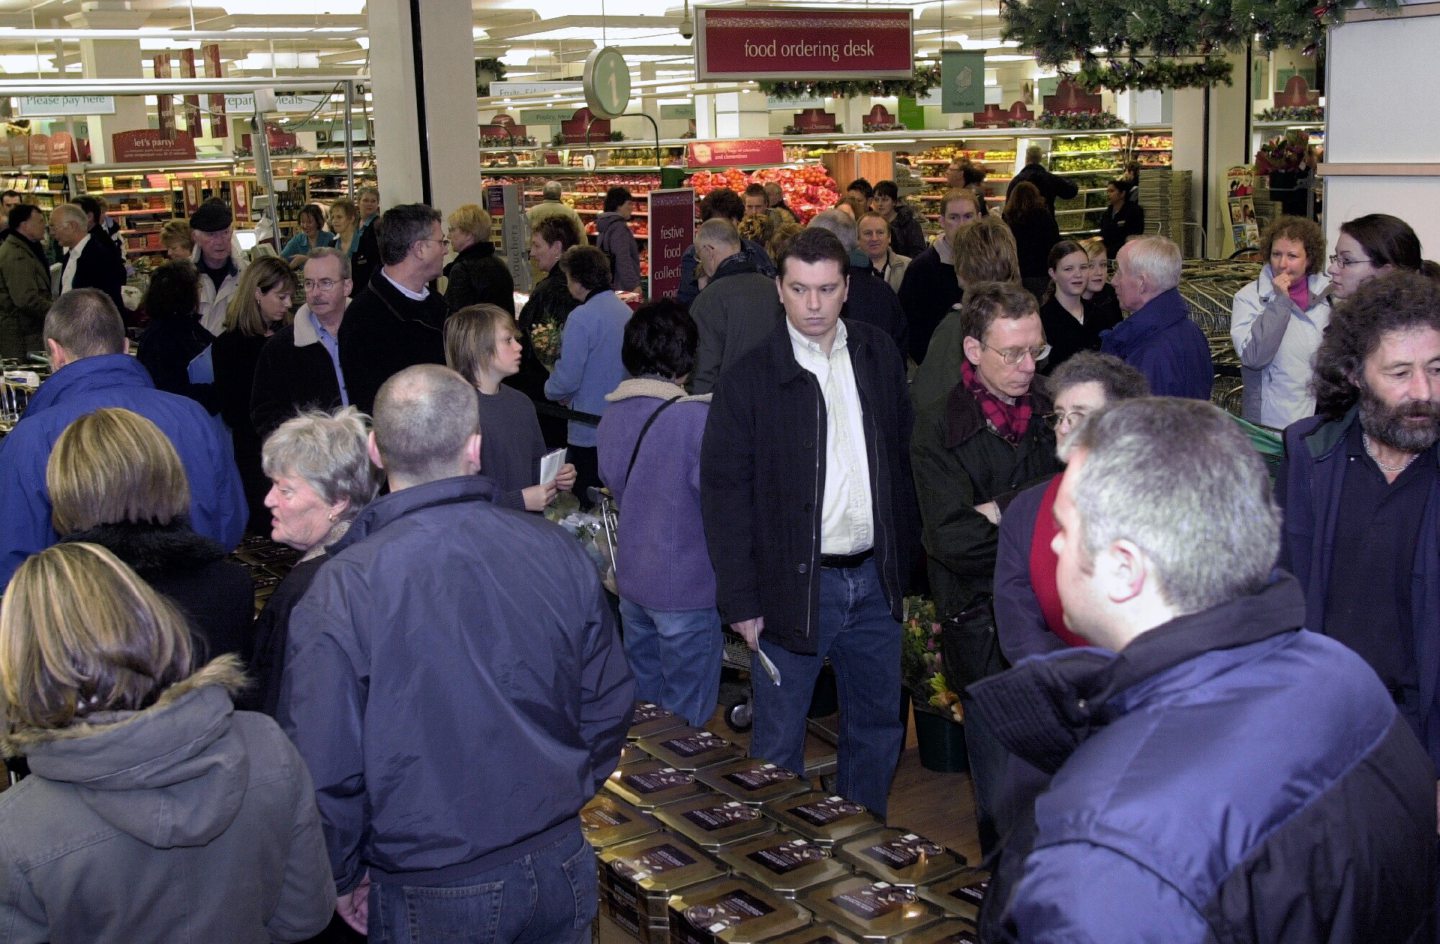 Christmas Eve shoppers queuing at the entrance to the shop